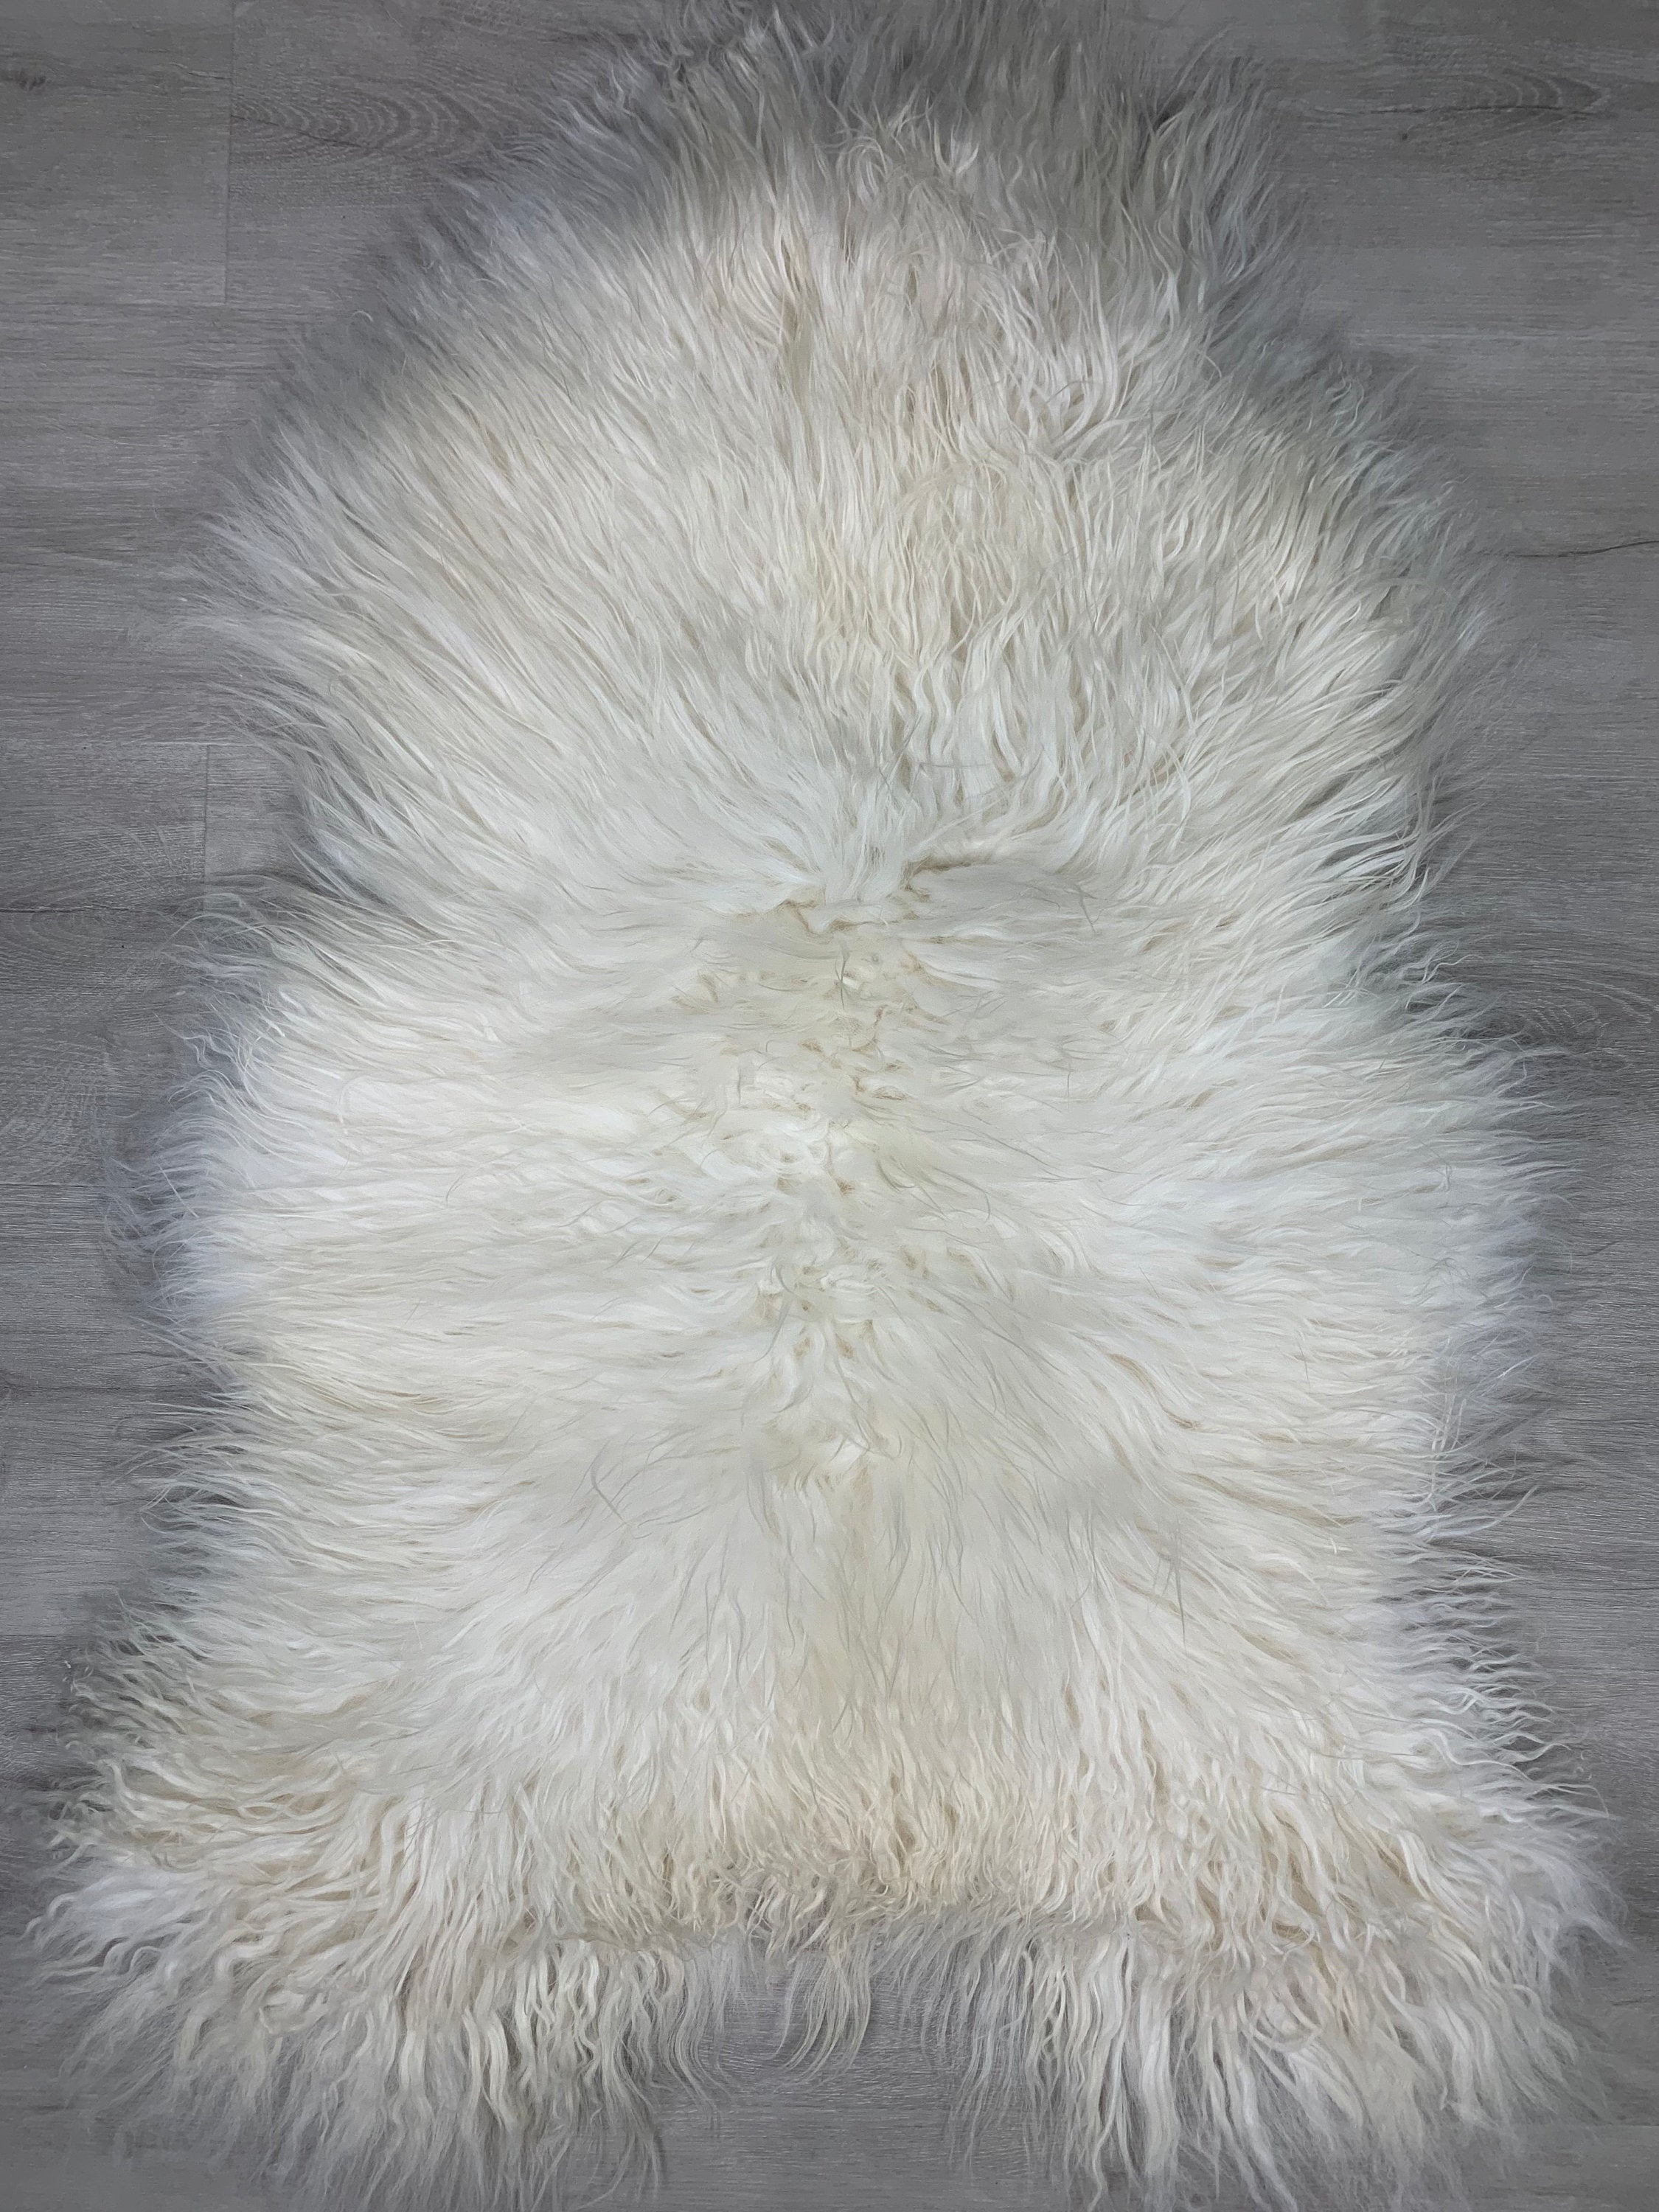 Curly Iceland Genuine Sheepskin Rug | Curly White  pelt fur throw | beautiful natural color modern decor | motorcycle seat cover | Pet bed